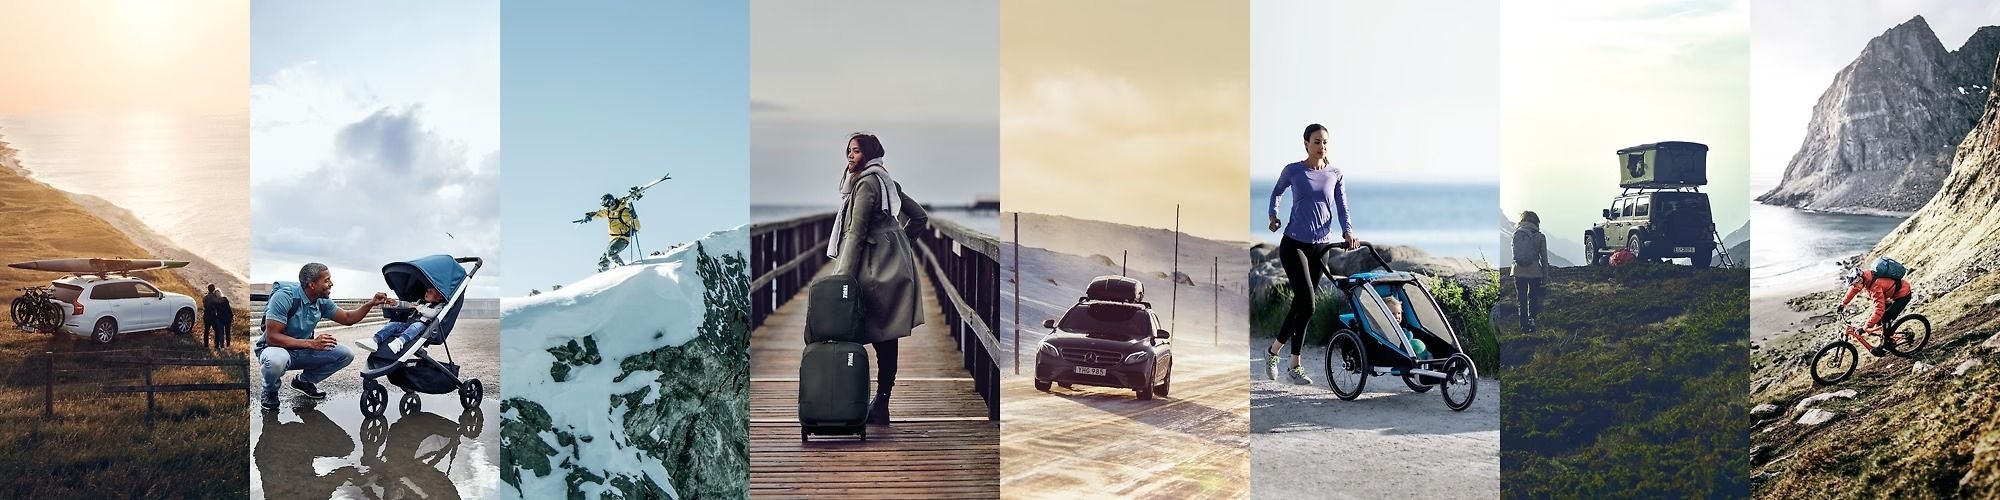 Be Road Trip Ready with Thule